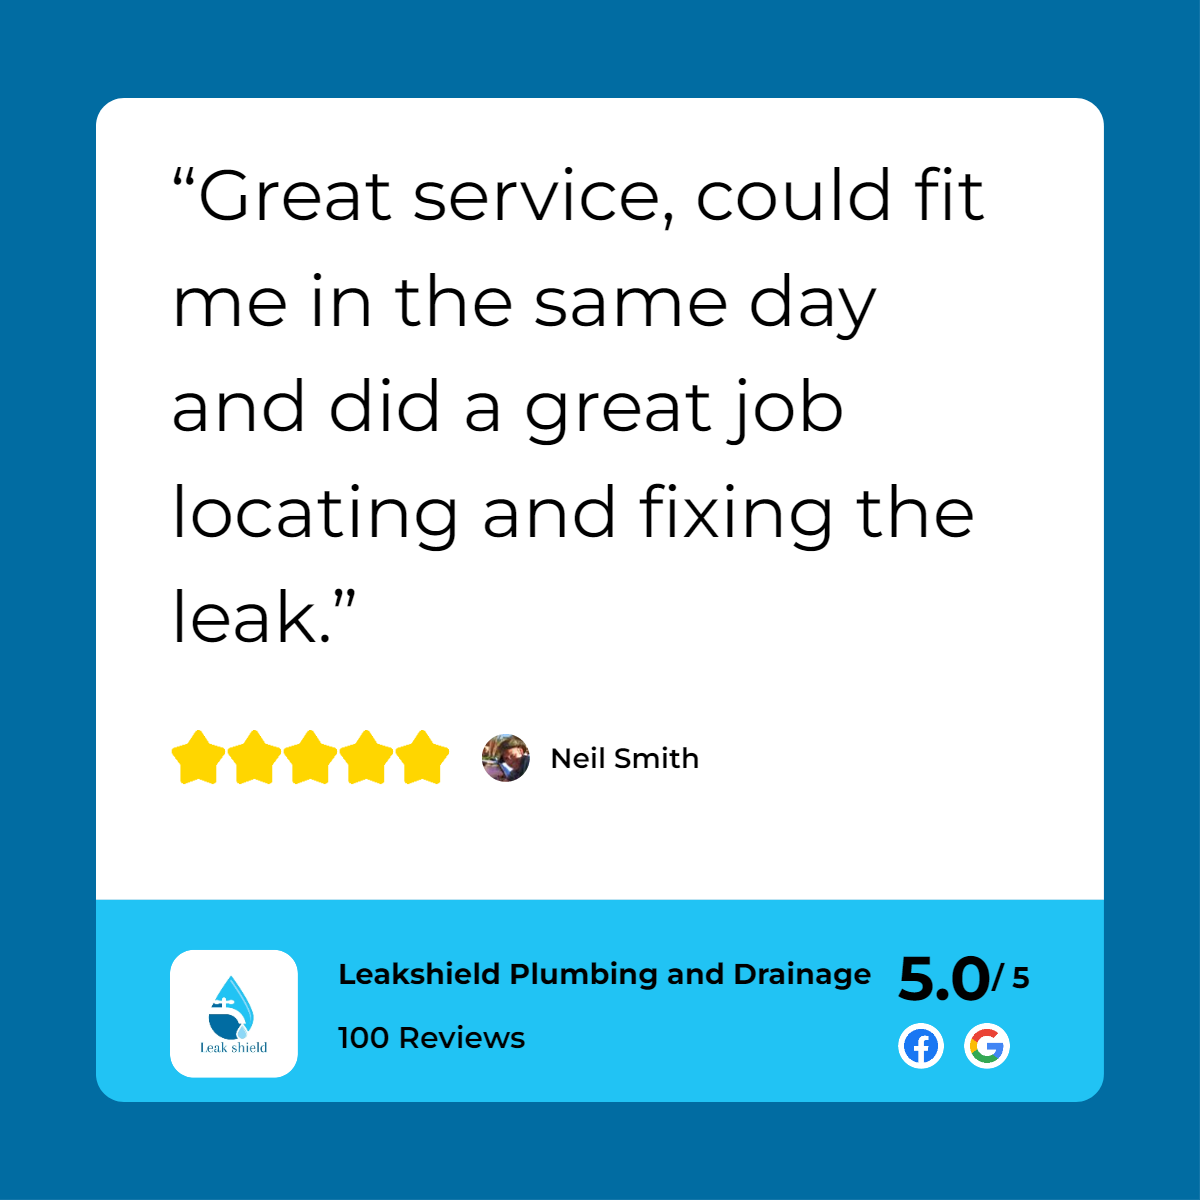 Great service, could fit me in the same day and locate a plumber to fix the leak.